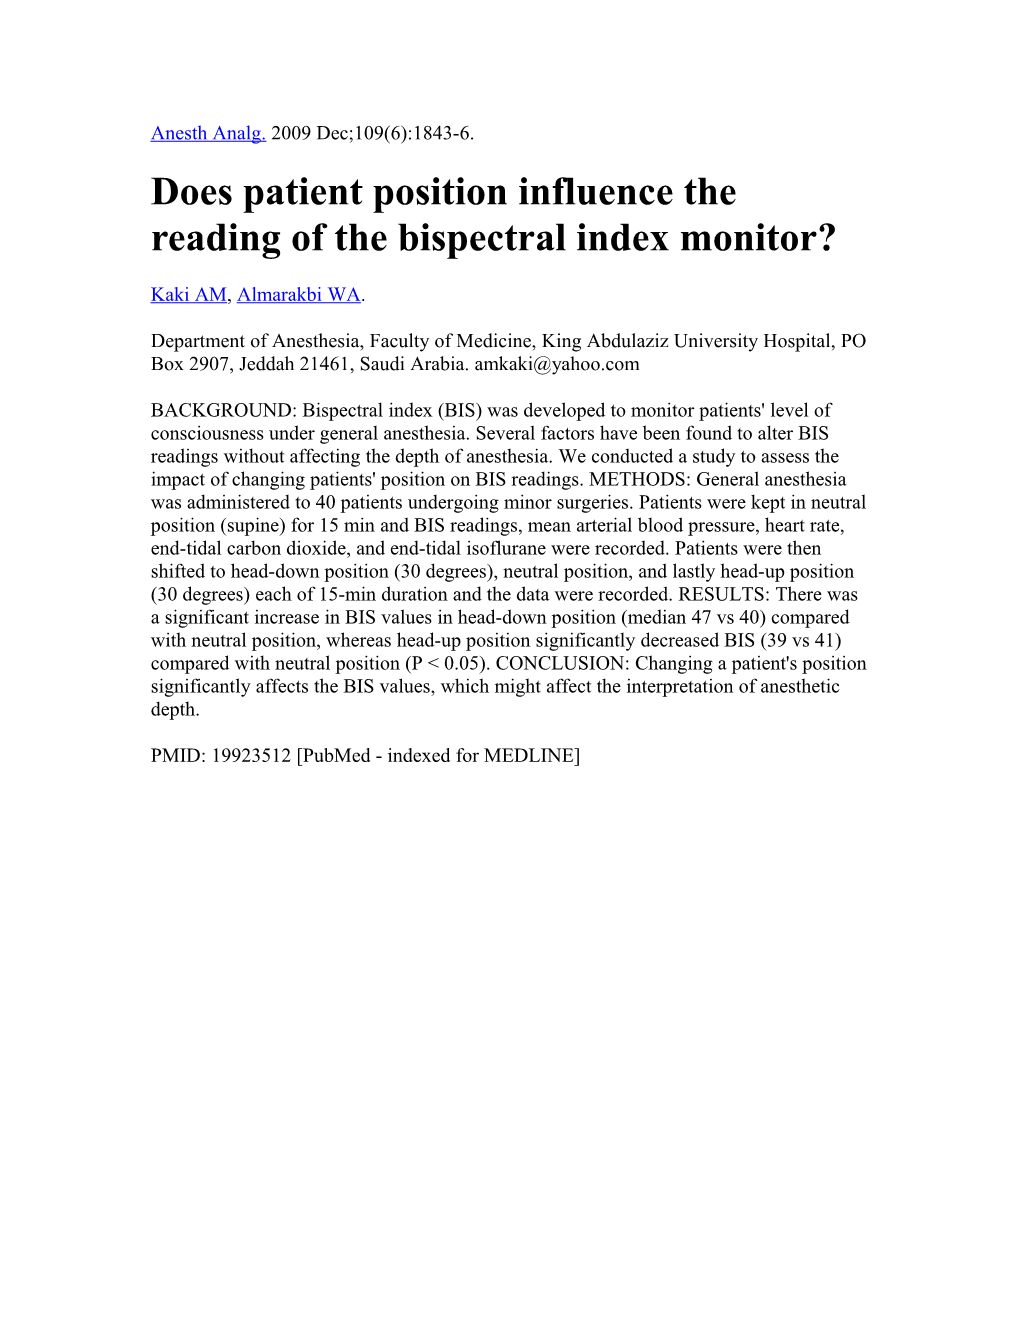 Does Patient Position Influence the Reading of the Bispectral Index Monitor?